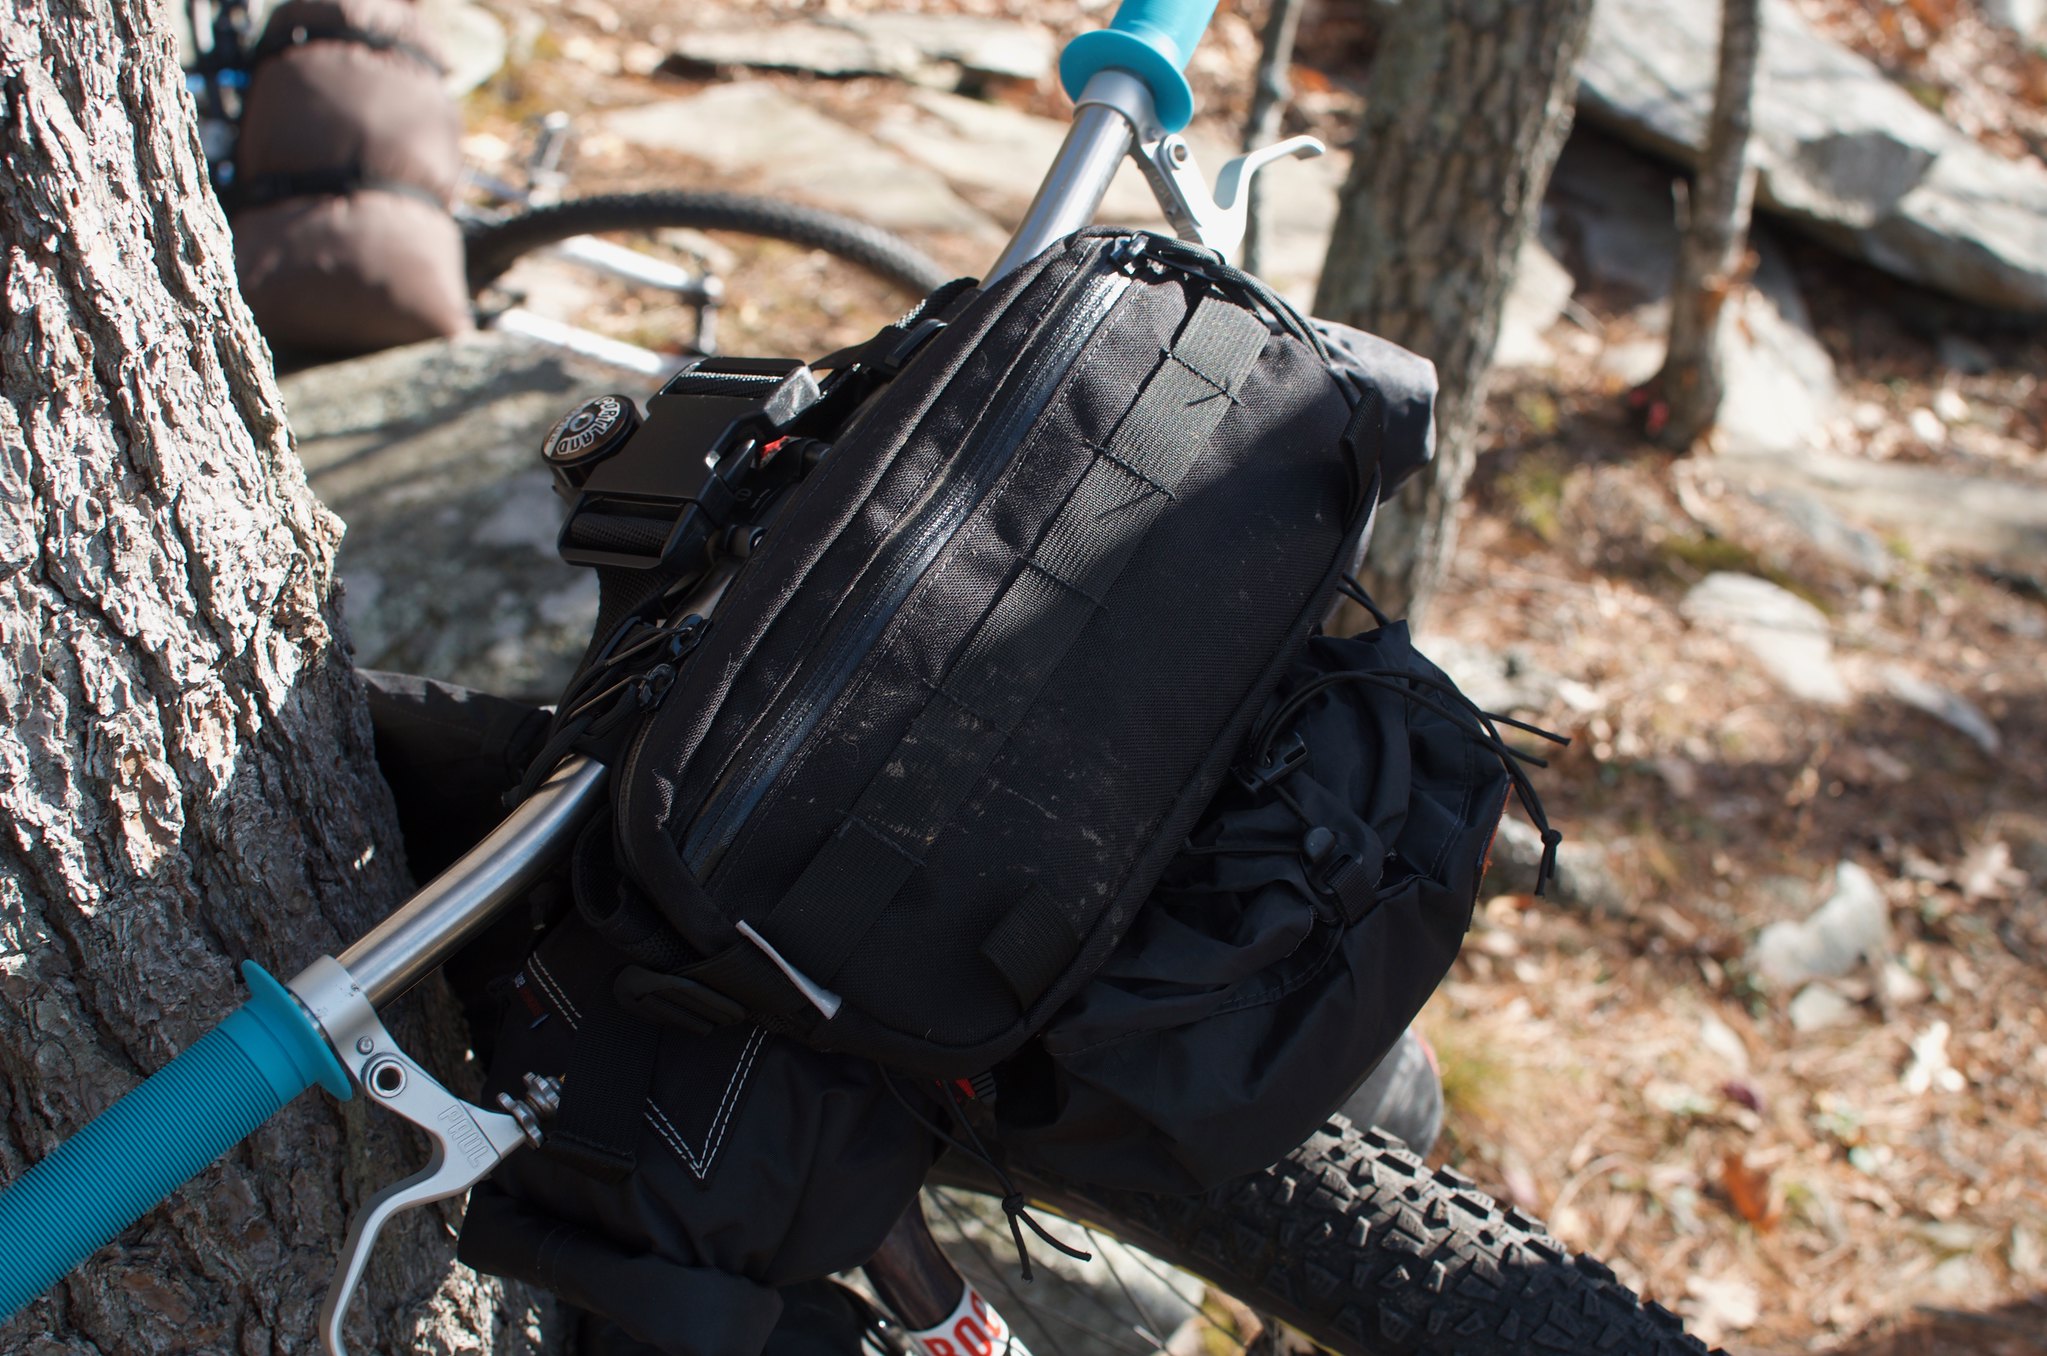 Mini-Review: Seagull Bags Trail Buddy – Max, The Cyclist